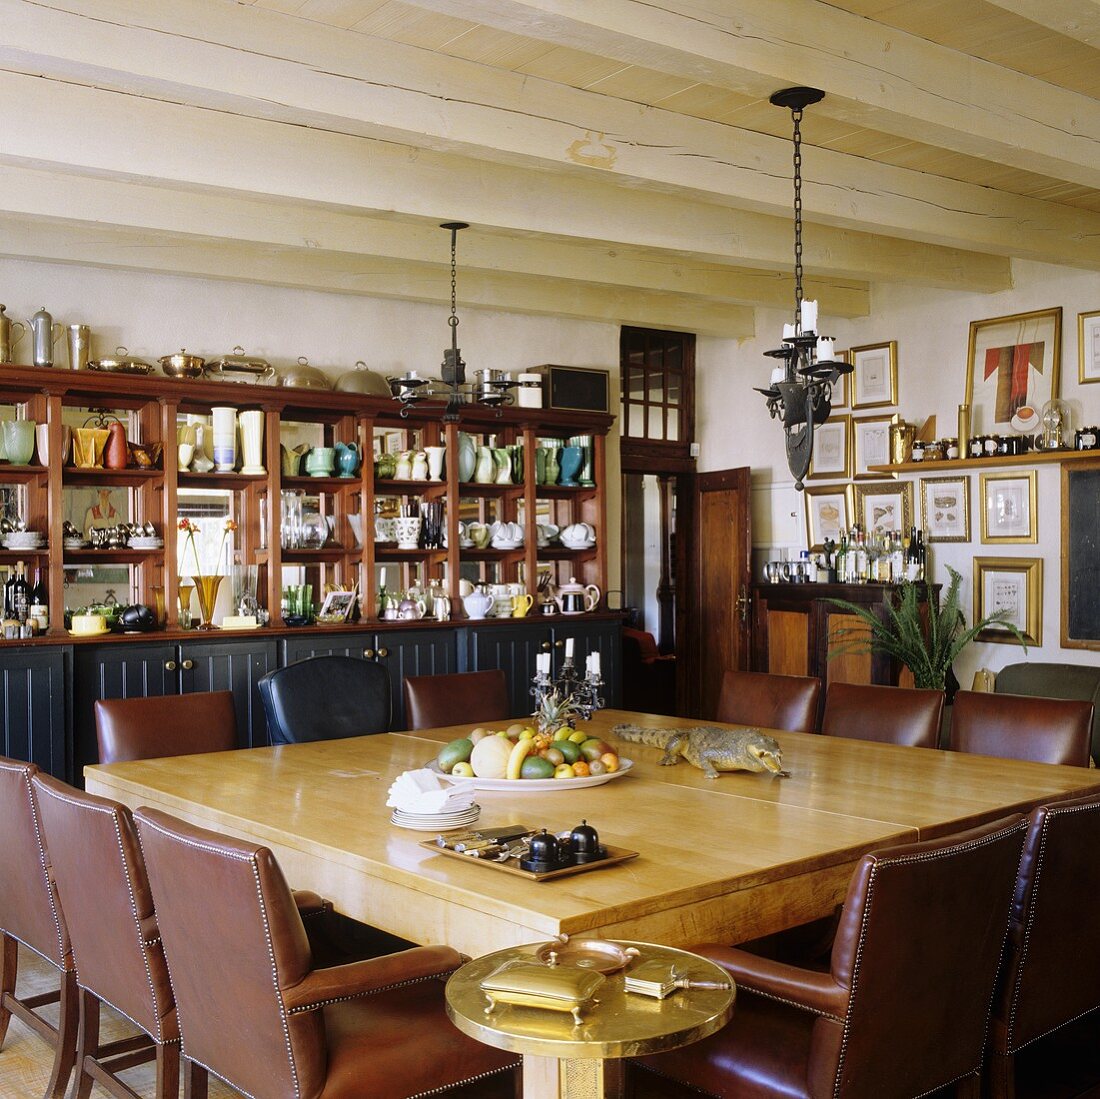 A dining table with brown leather armchairs in a room with a rustic wooden ceiling in a South African country house